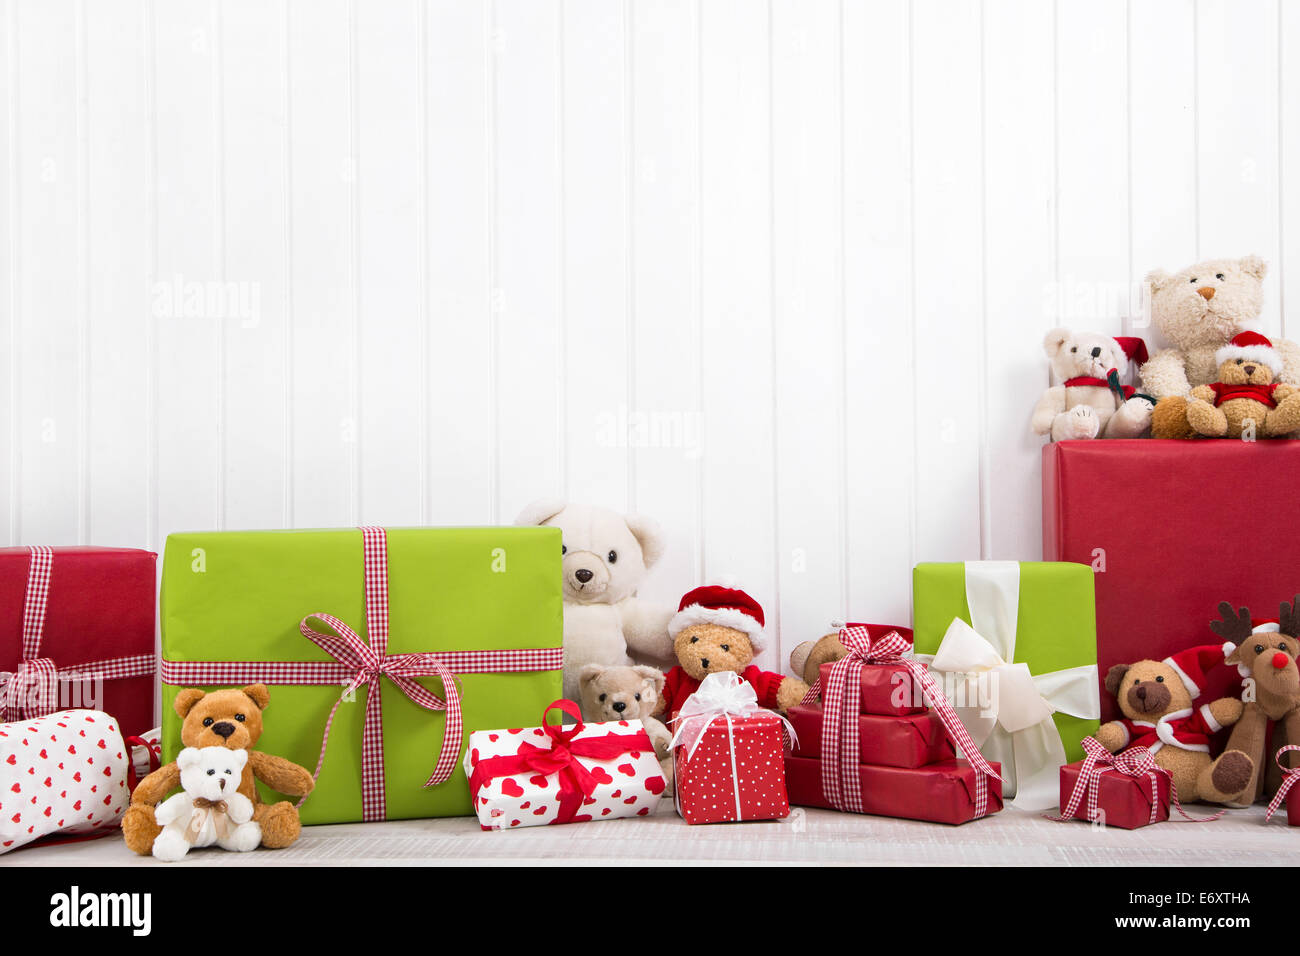 Christmas background with presents in green, red and white with teddy bears Stock Photo